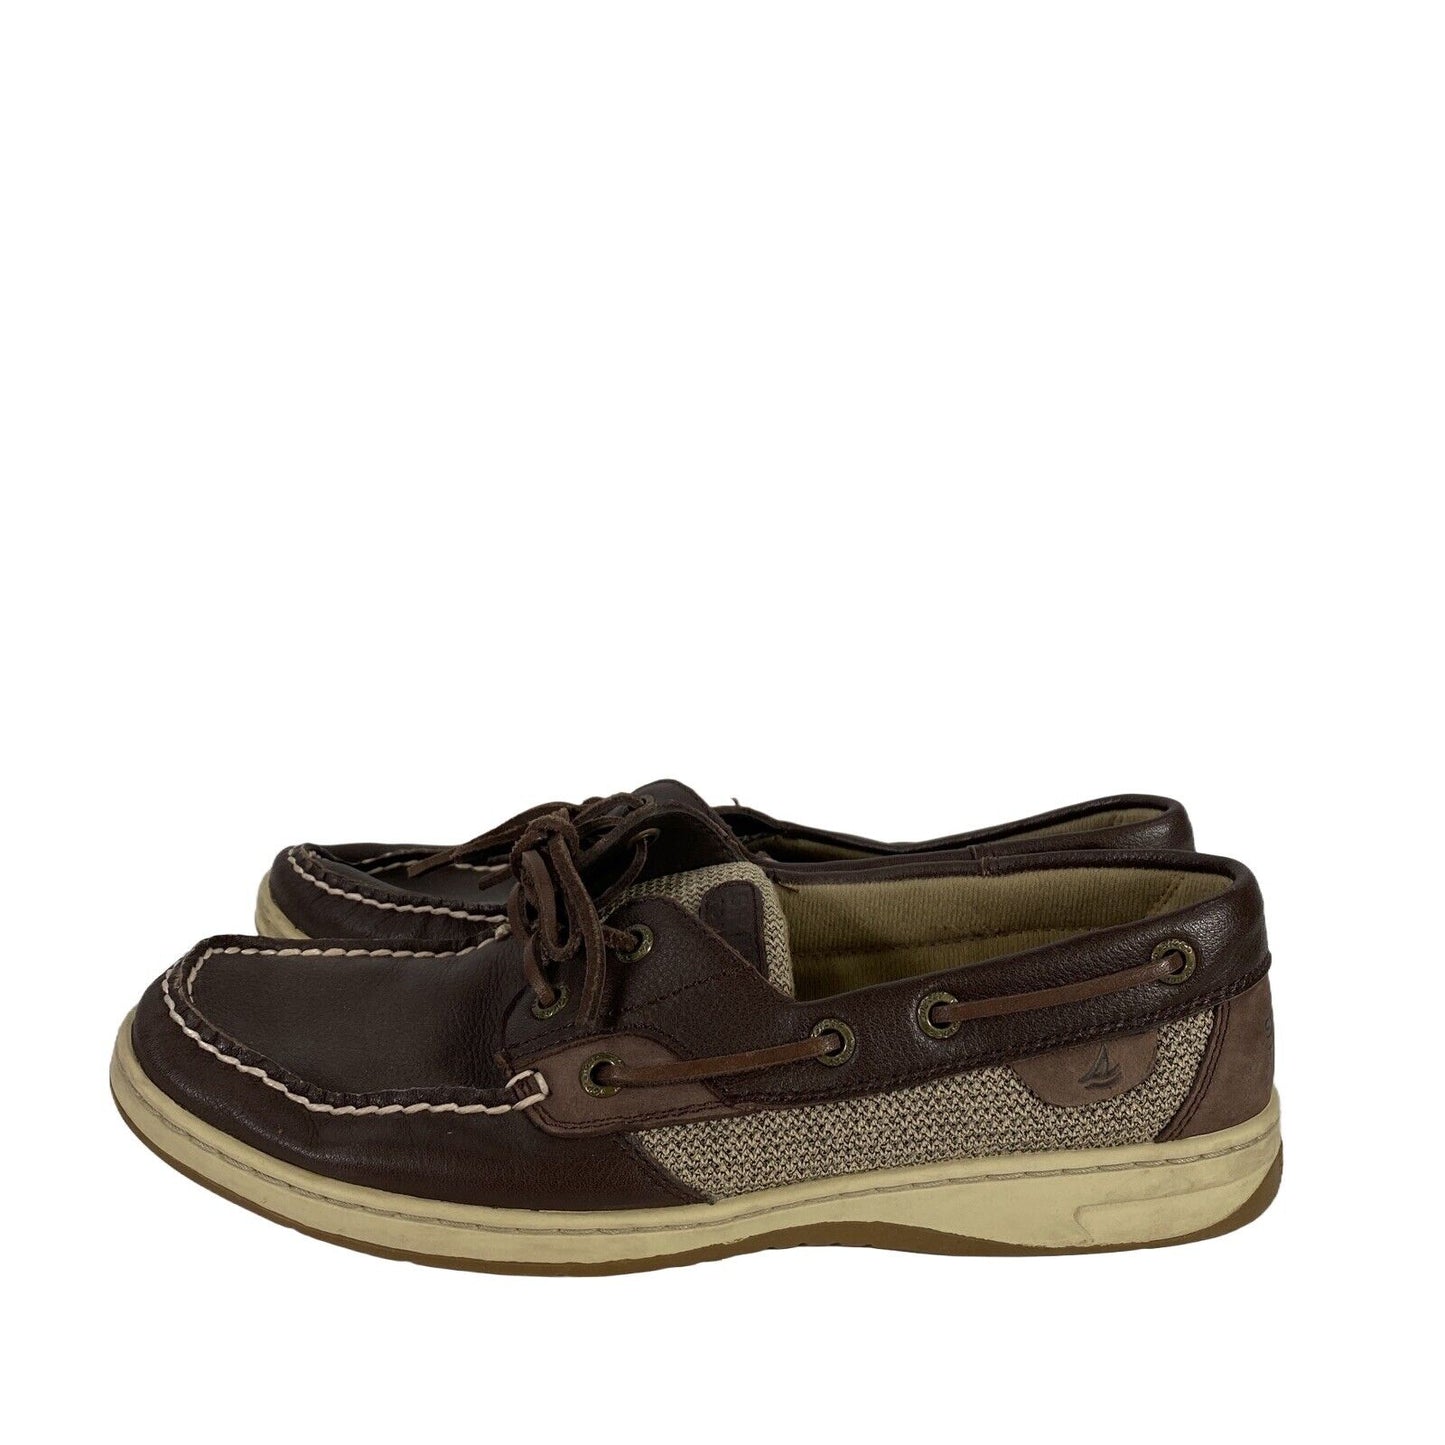 Sperry Women's Brown Leather Lace Up Boat Shoes - 9 M